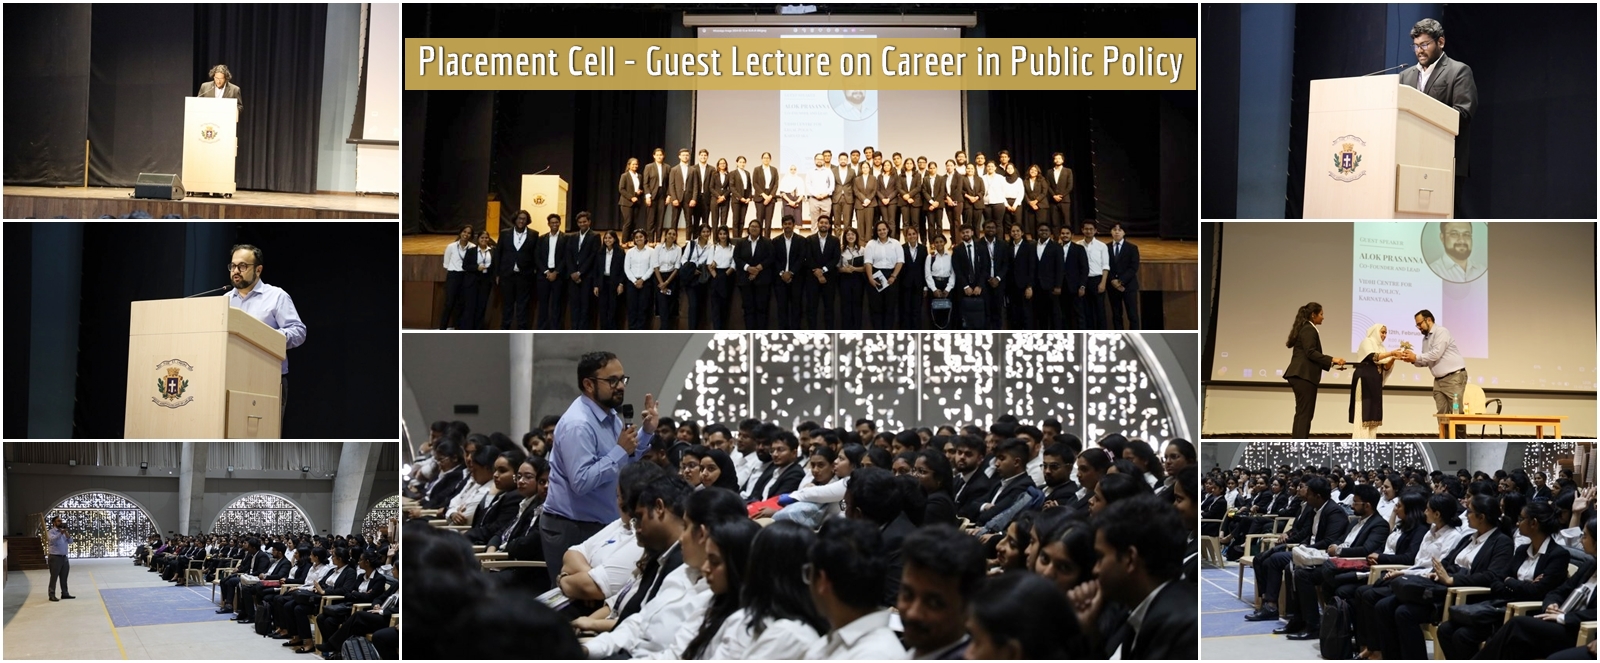 Placement Cell - Guest Lecture on Career in Public Policy
